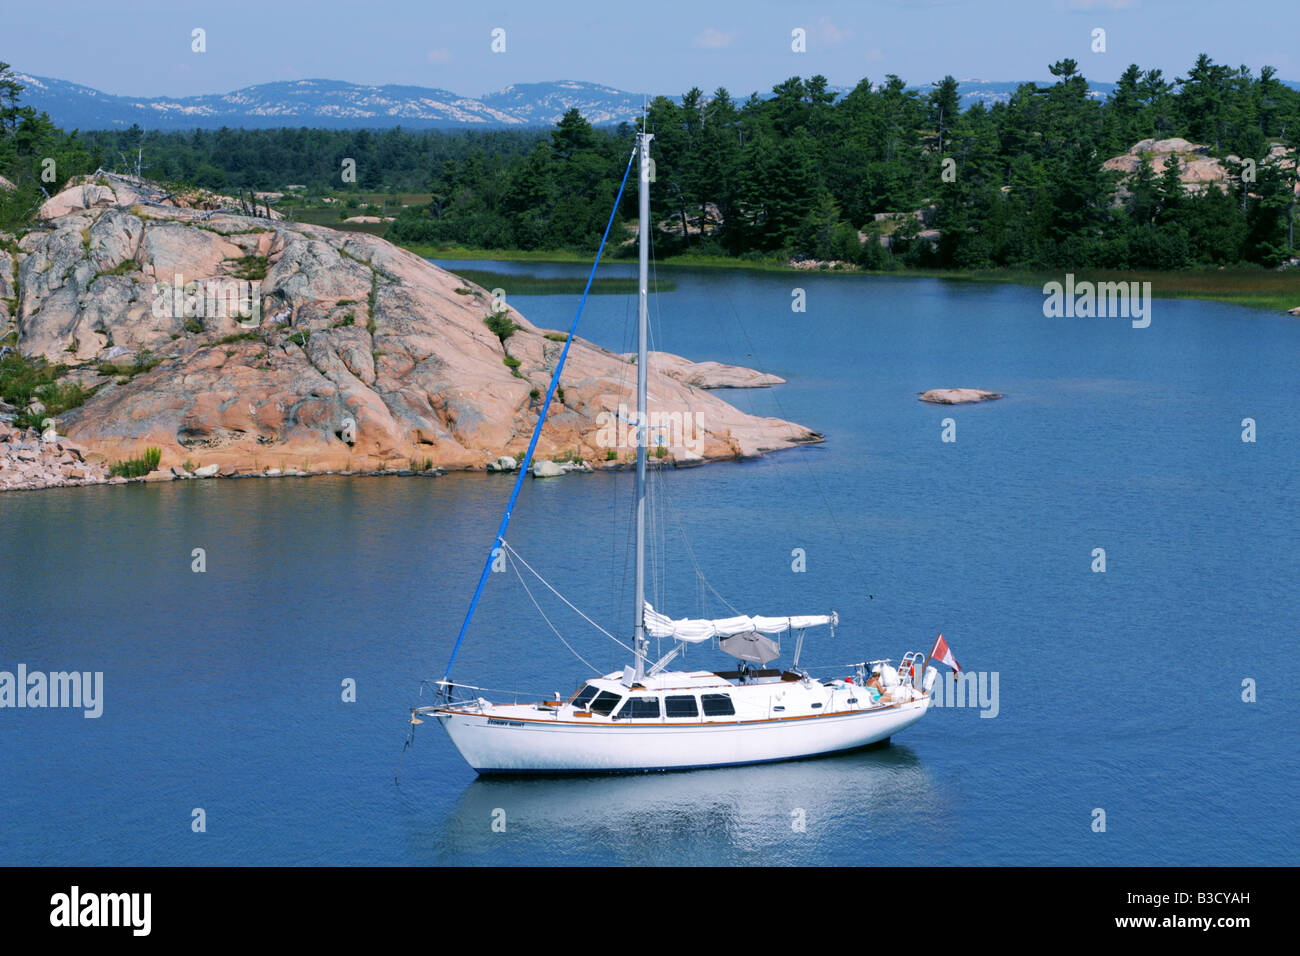 Sailboat moored on the turquoise water of Thirty Thousand Islands in Georgian Bay Ontario Stock Photo